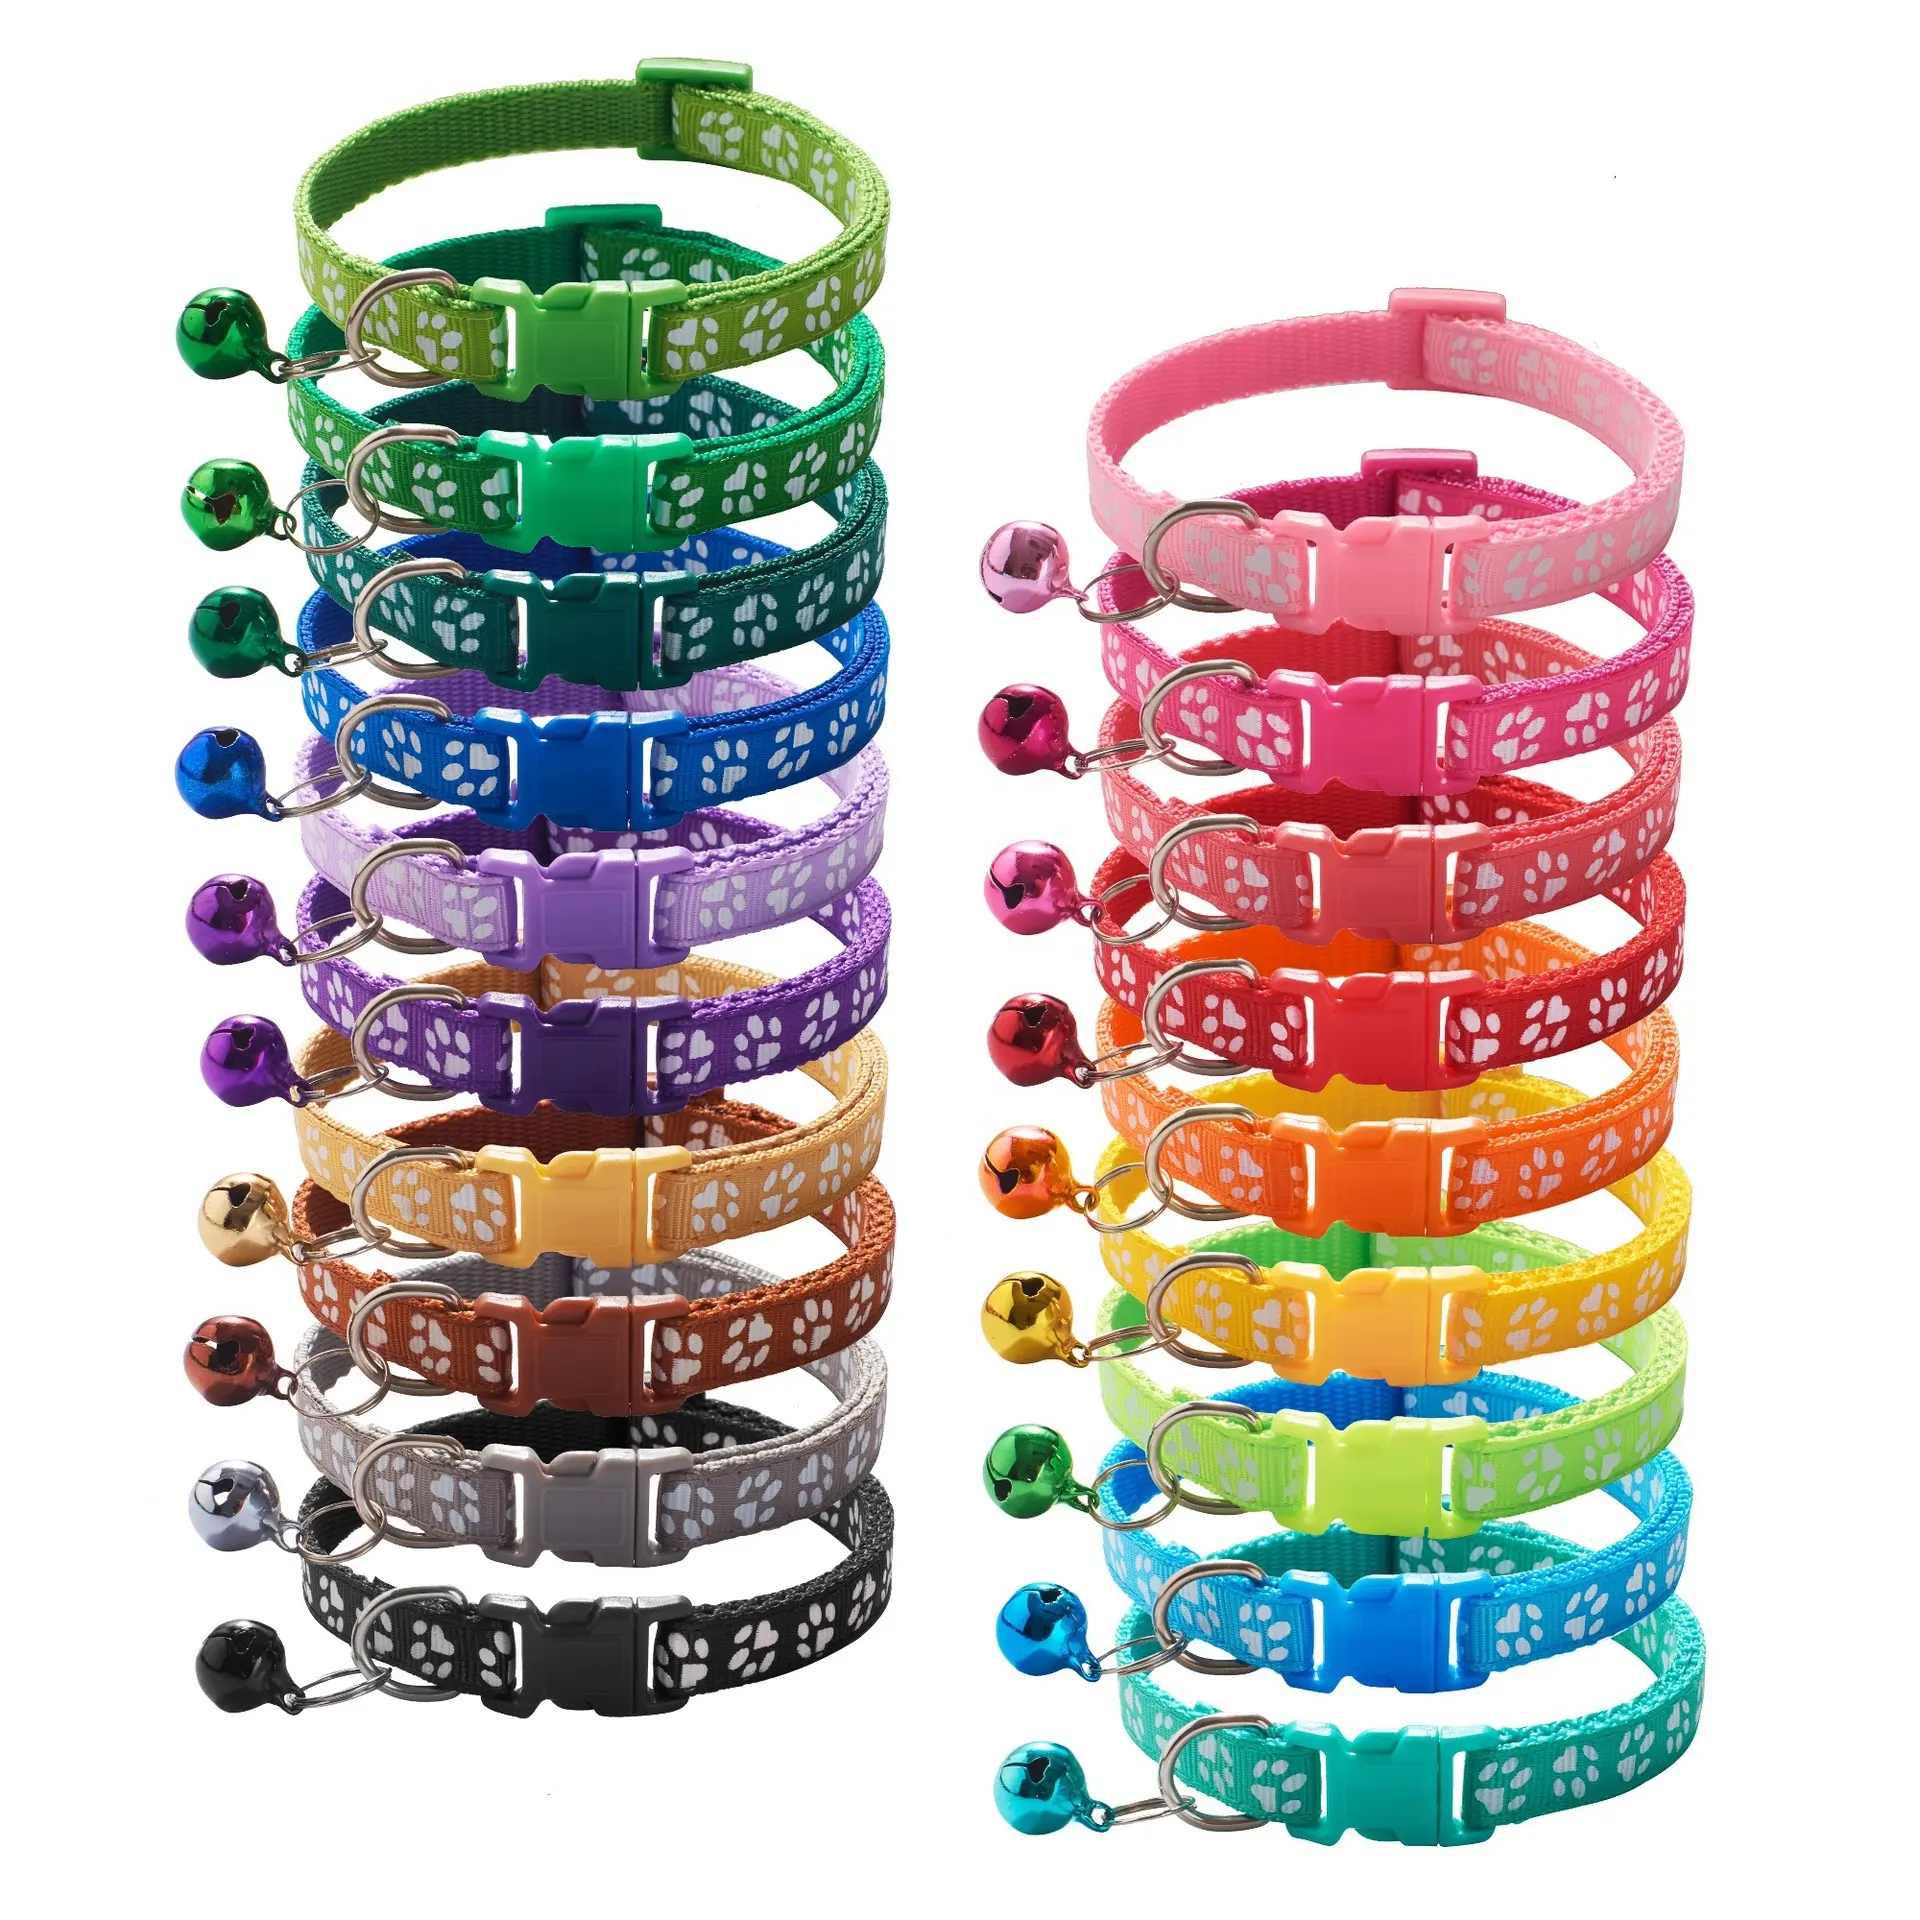 19 Colors Pet Supplies Dog Cat Collars Pets Cute Solid Color Footprints Puppy Bell Collar Kitten Nylon Collar In Stock